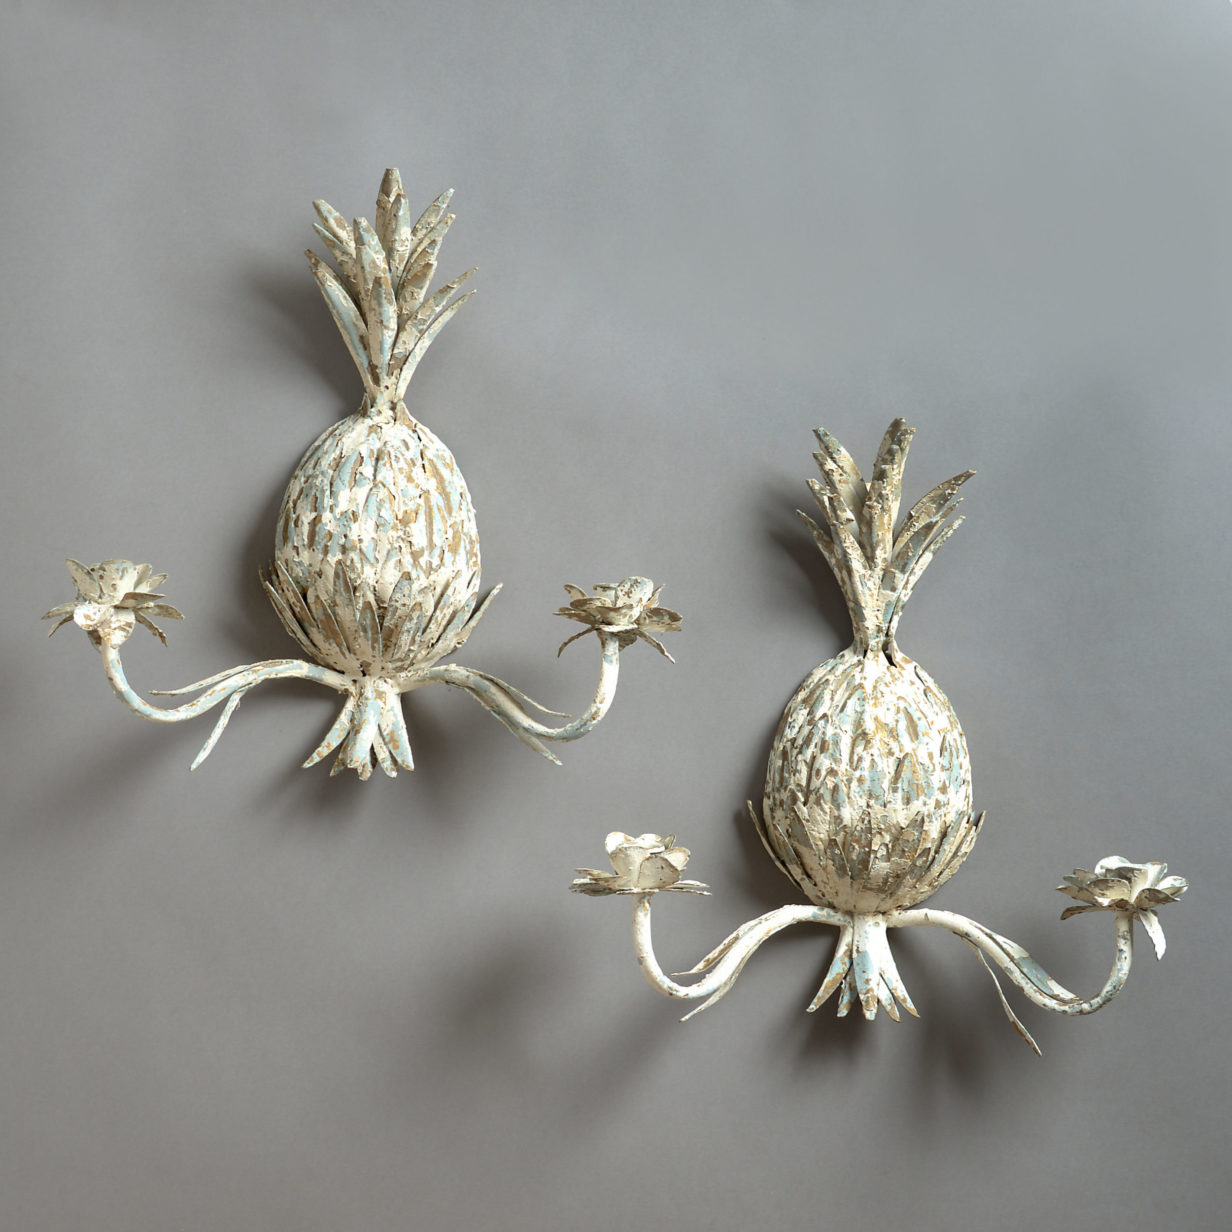 A pair of 20th century tole pineapple wall lights